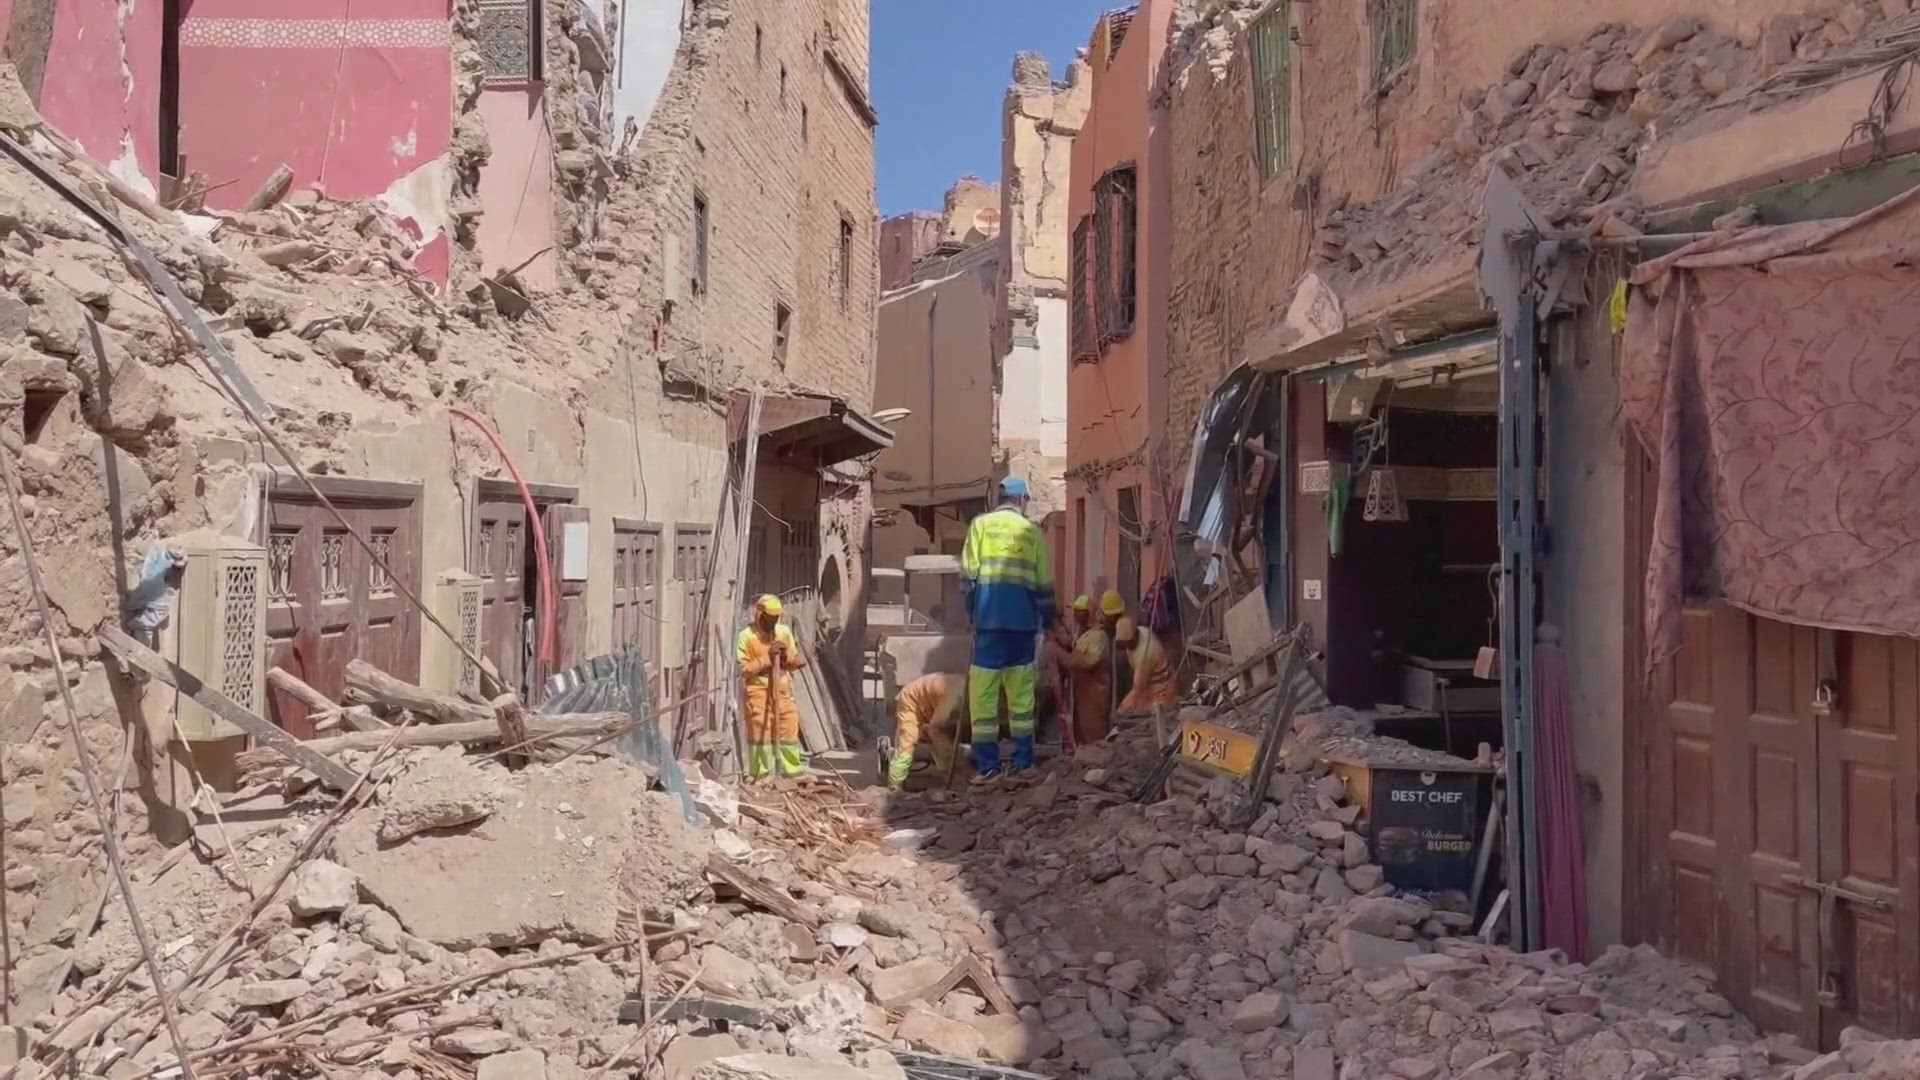 Many survivors of Morocco's most powerful earthquake in over a century were struggling in makeshift shelters today after a fourth night outside.